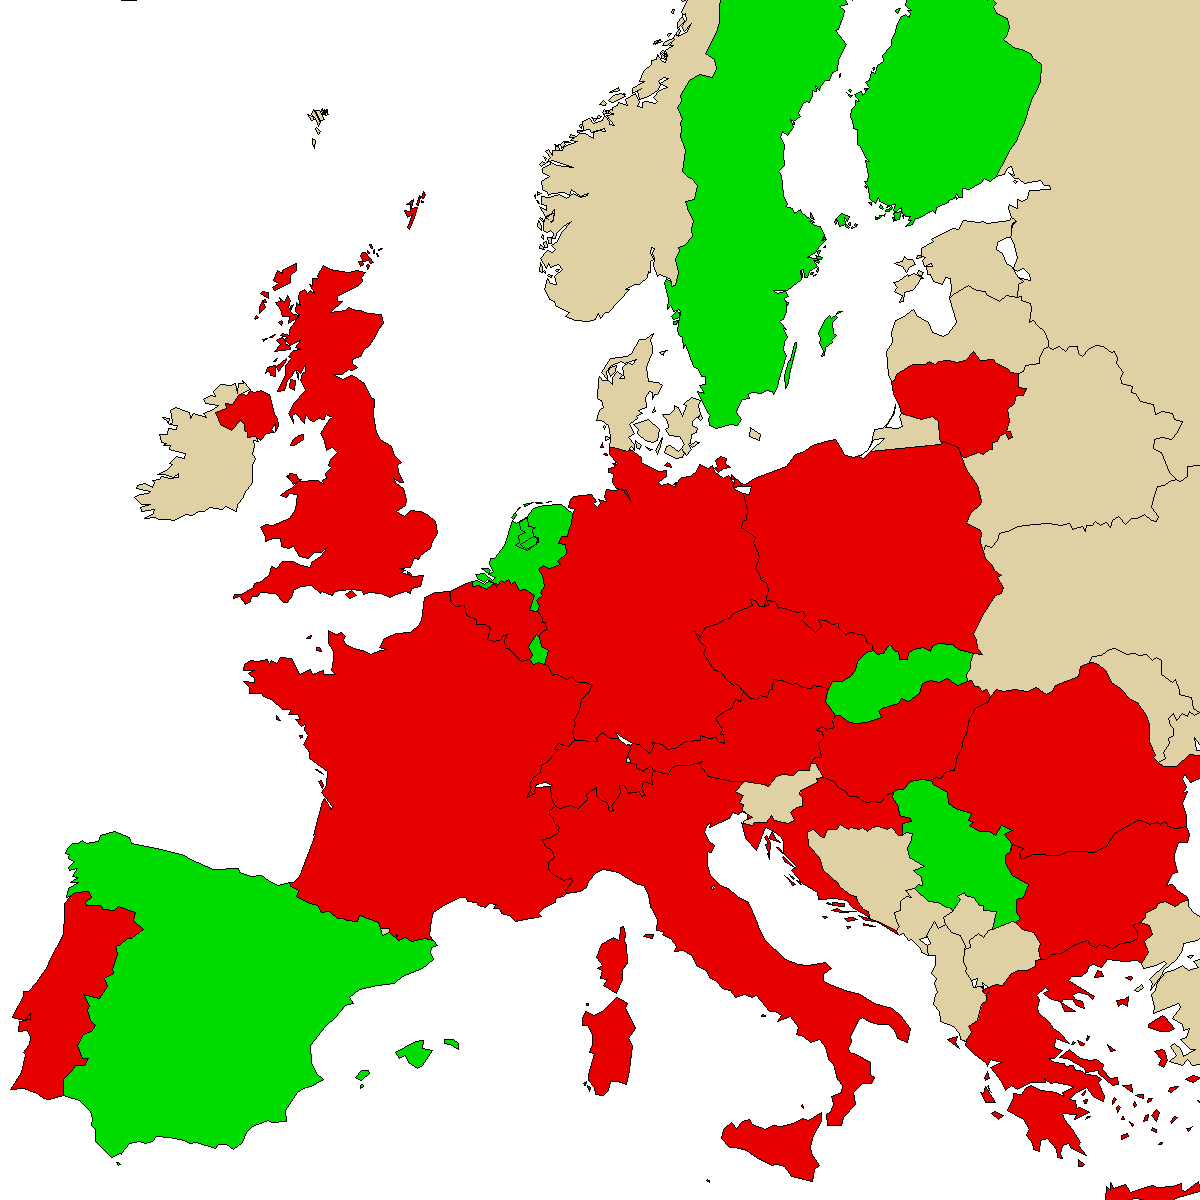 legal info map for our product 2CMC, green are countries where we found no ban, red with ban, grey is unknown